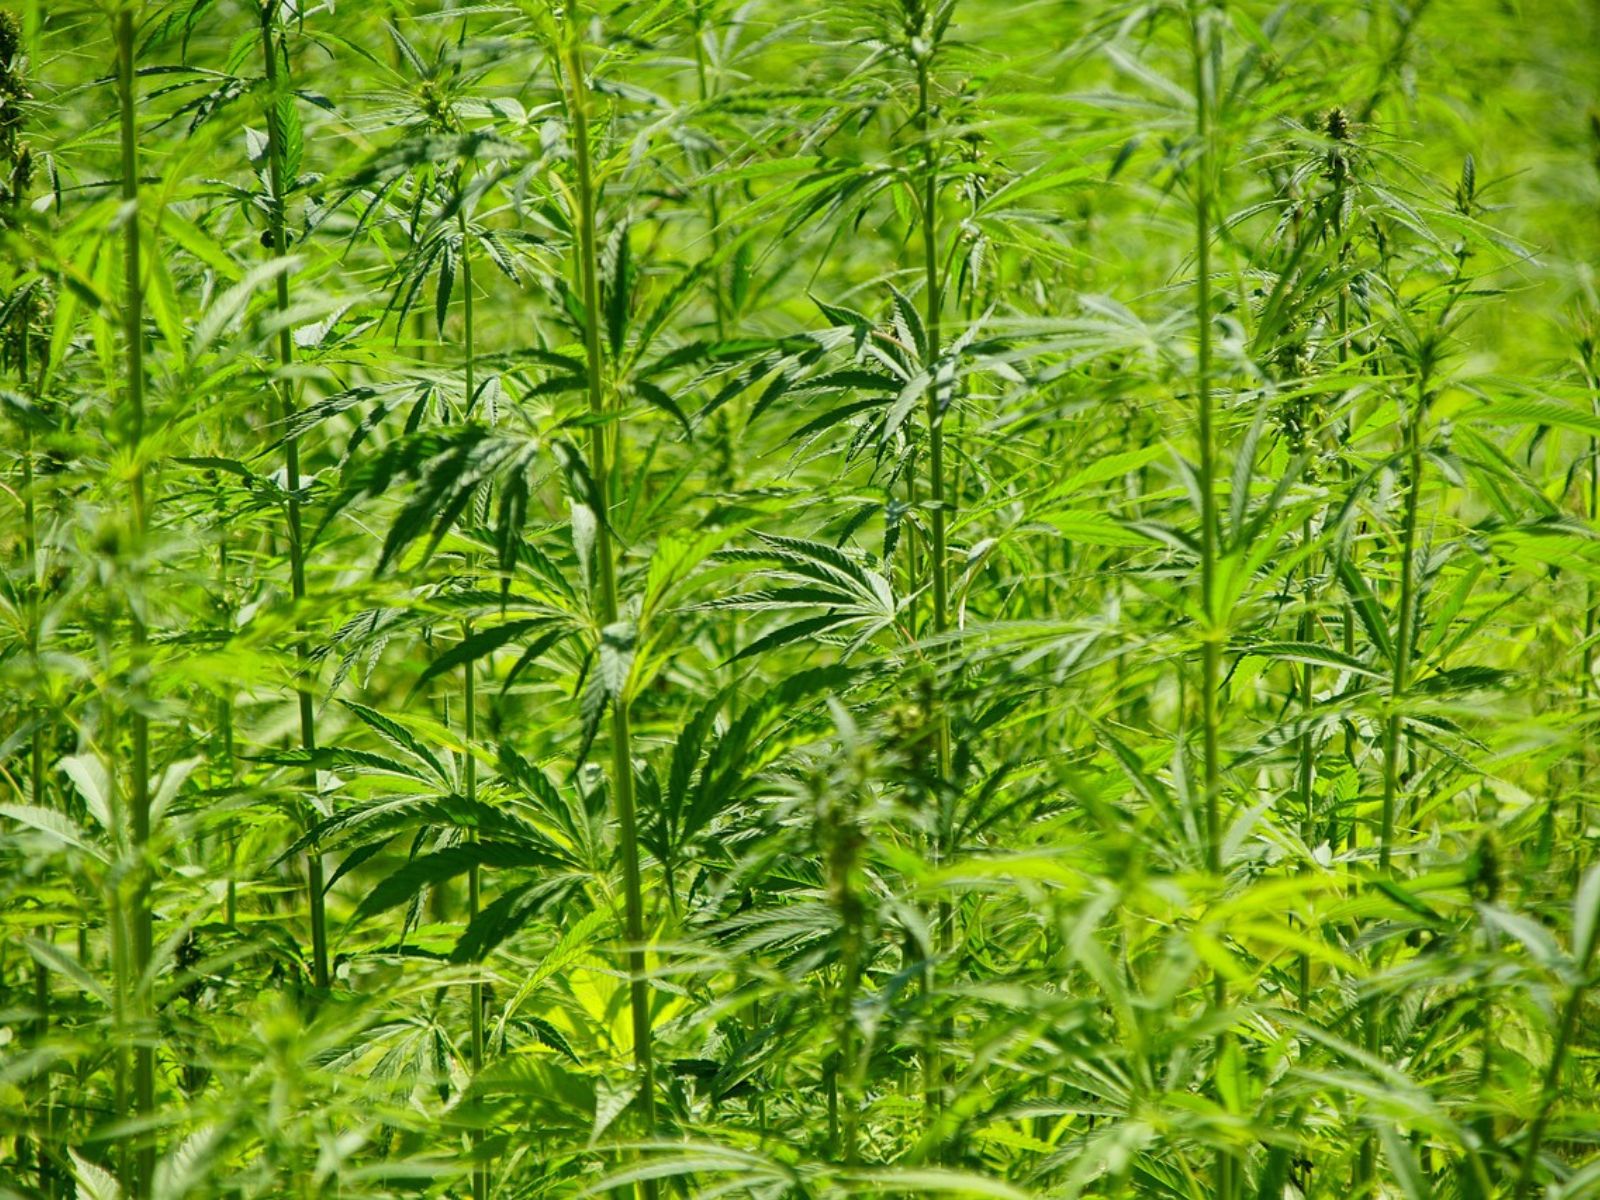 Research And Markets Projects $561 Million Global Hemp Fiber Market By 2029